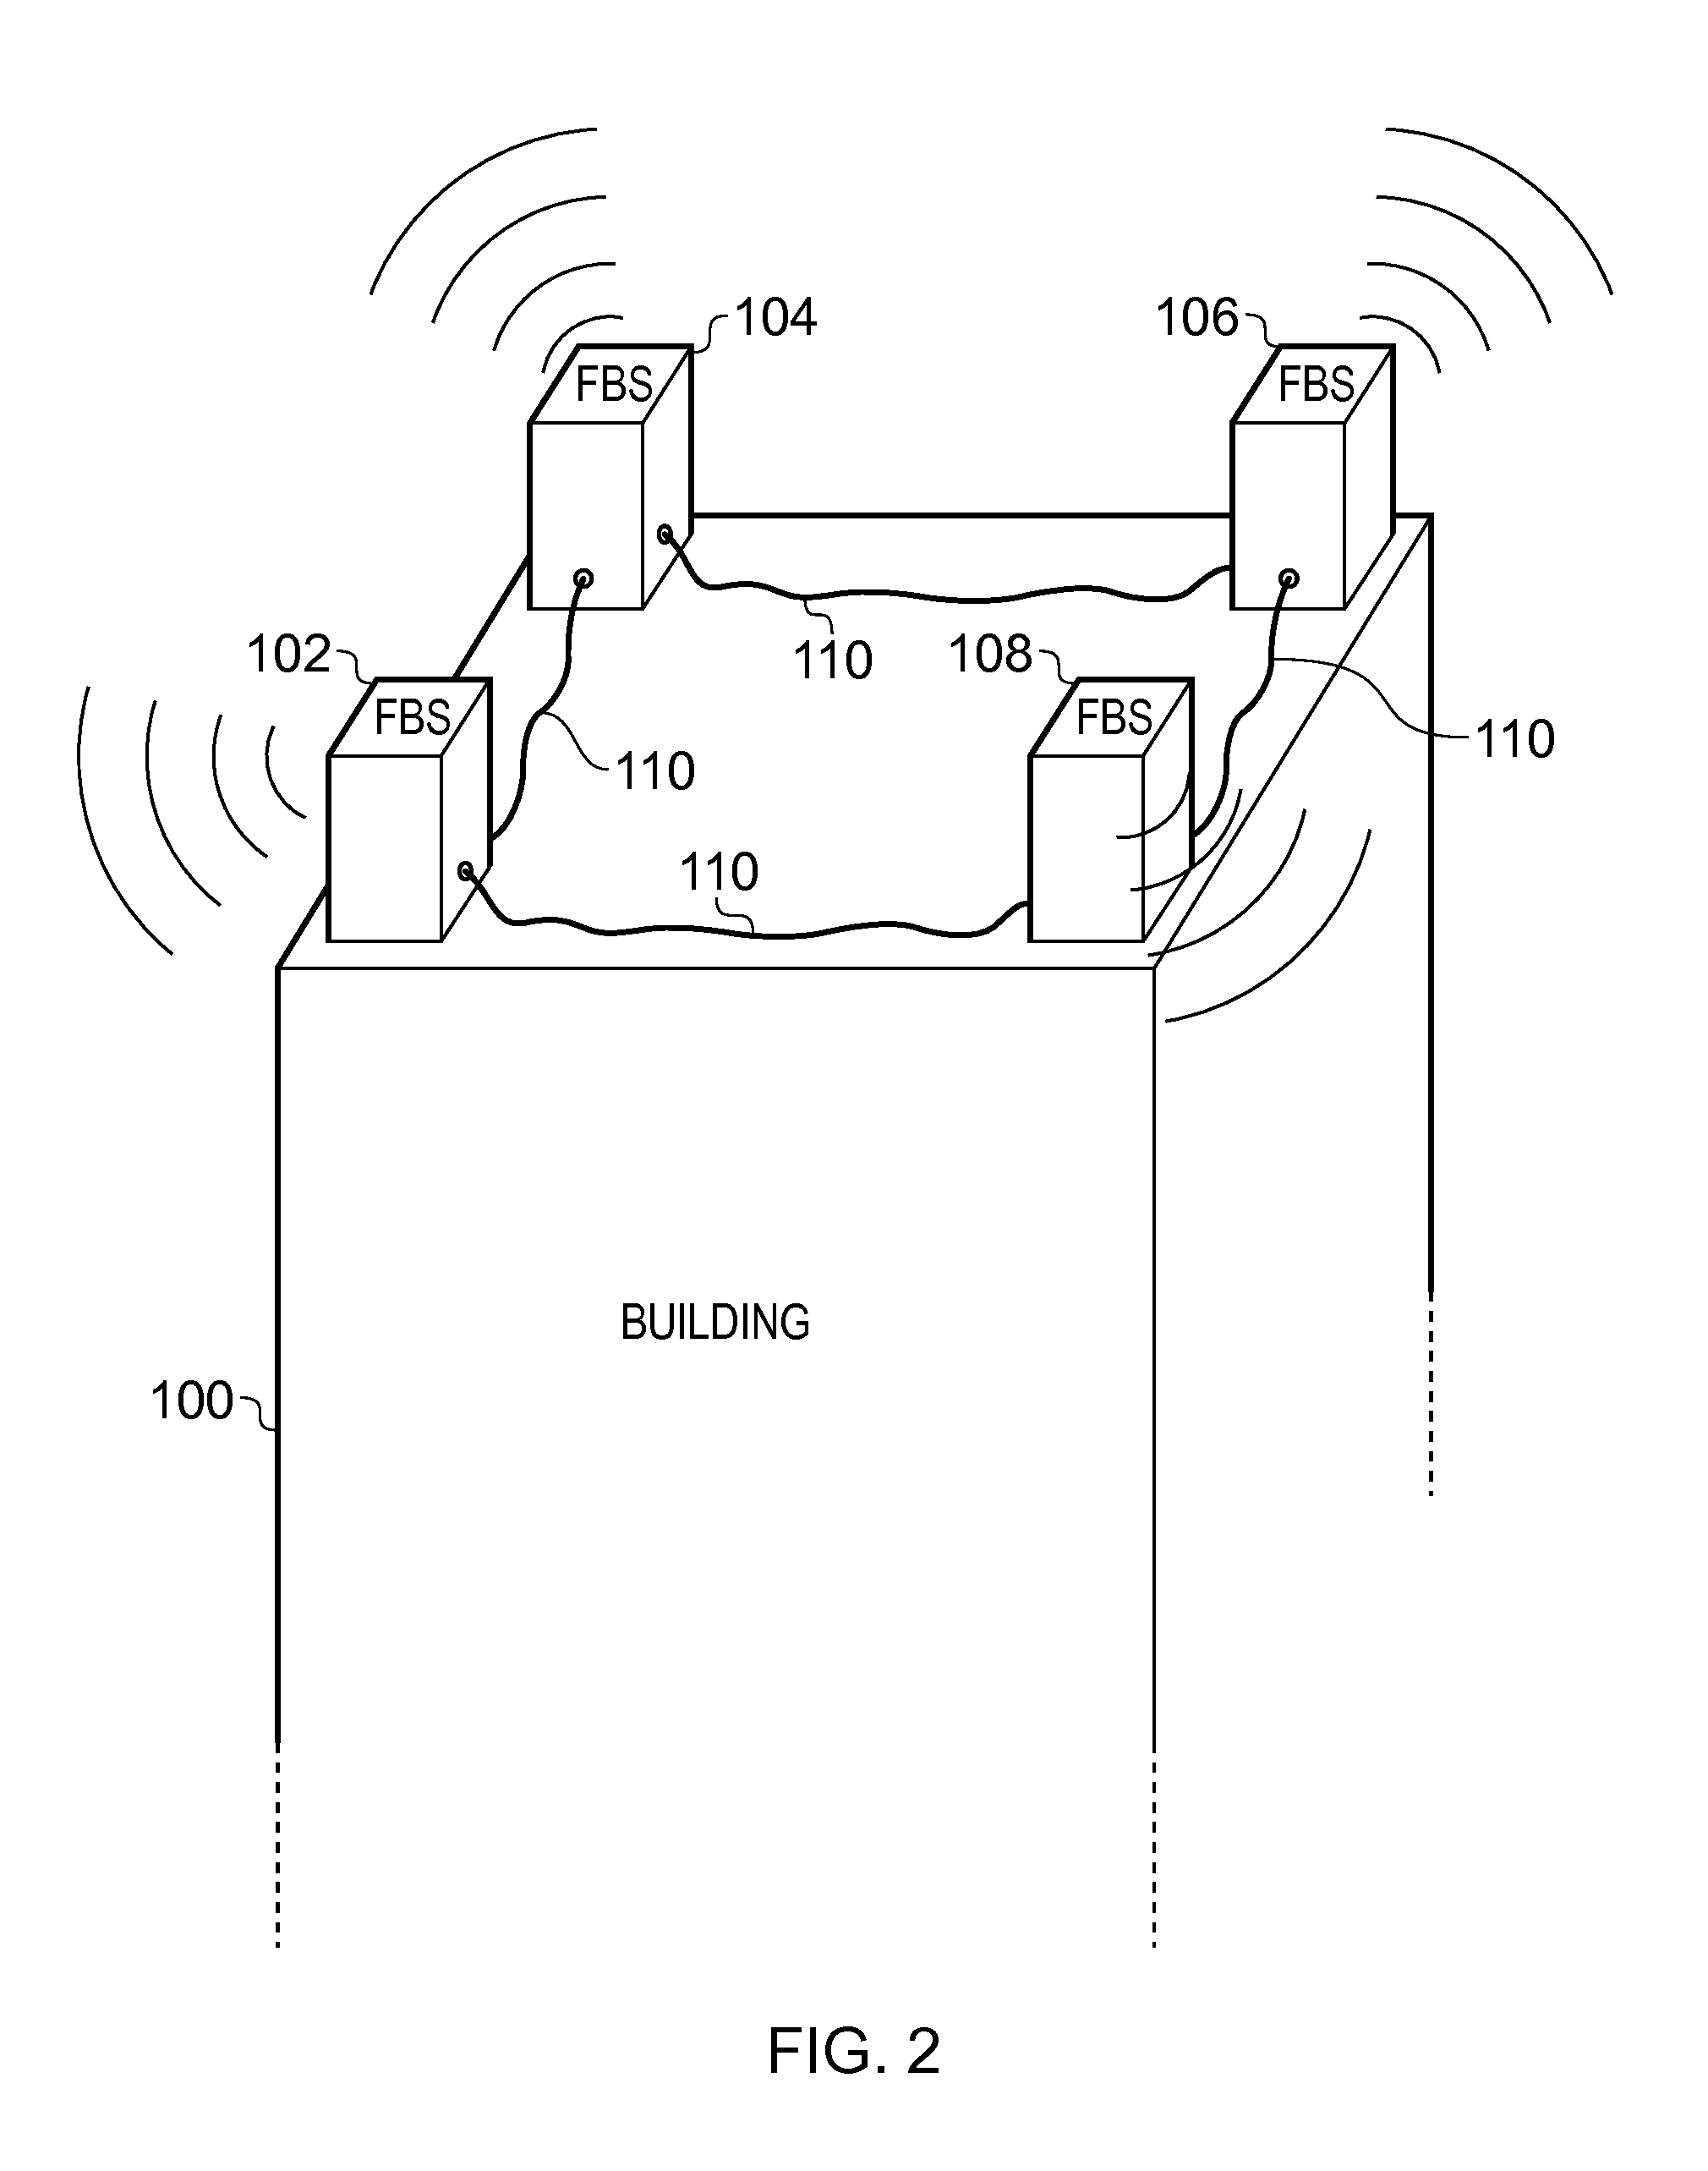 Cooperative Components in a Wireless Feeder Network